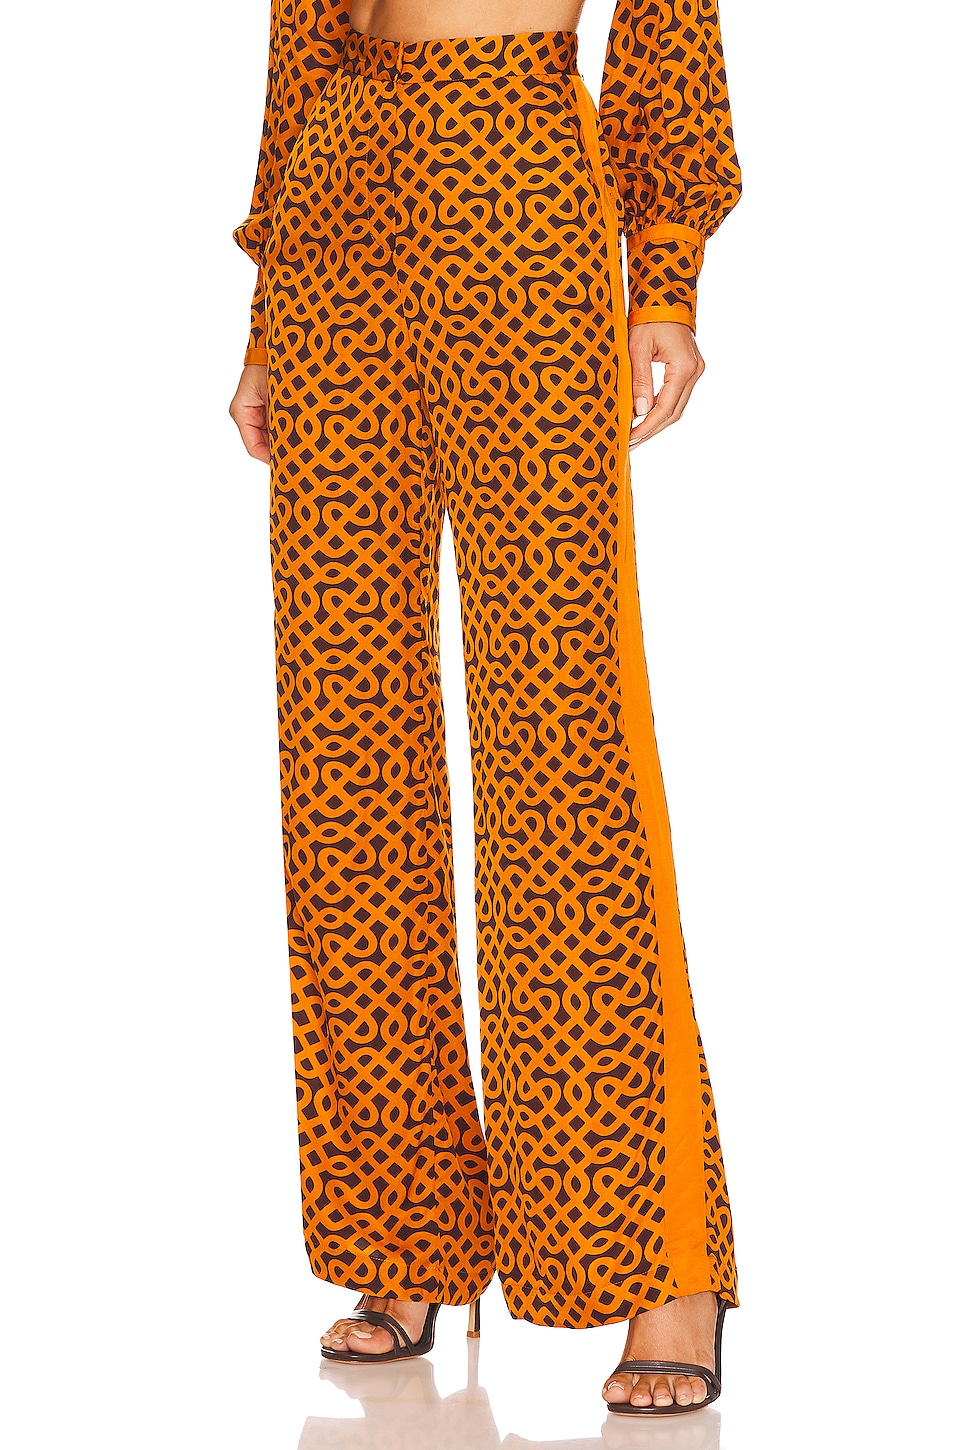 Akima Pant in Toffee 